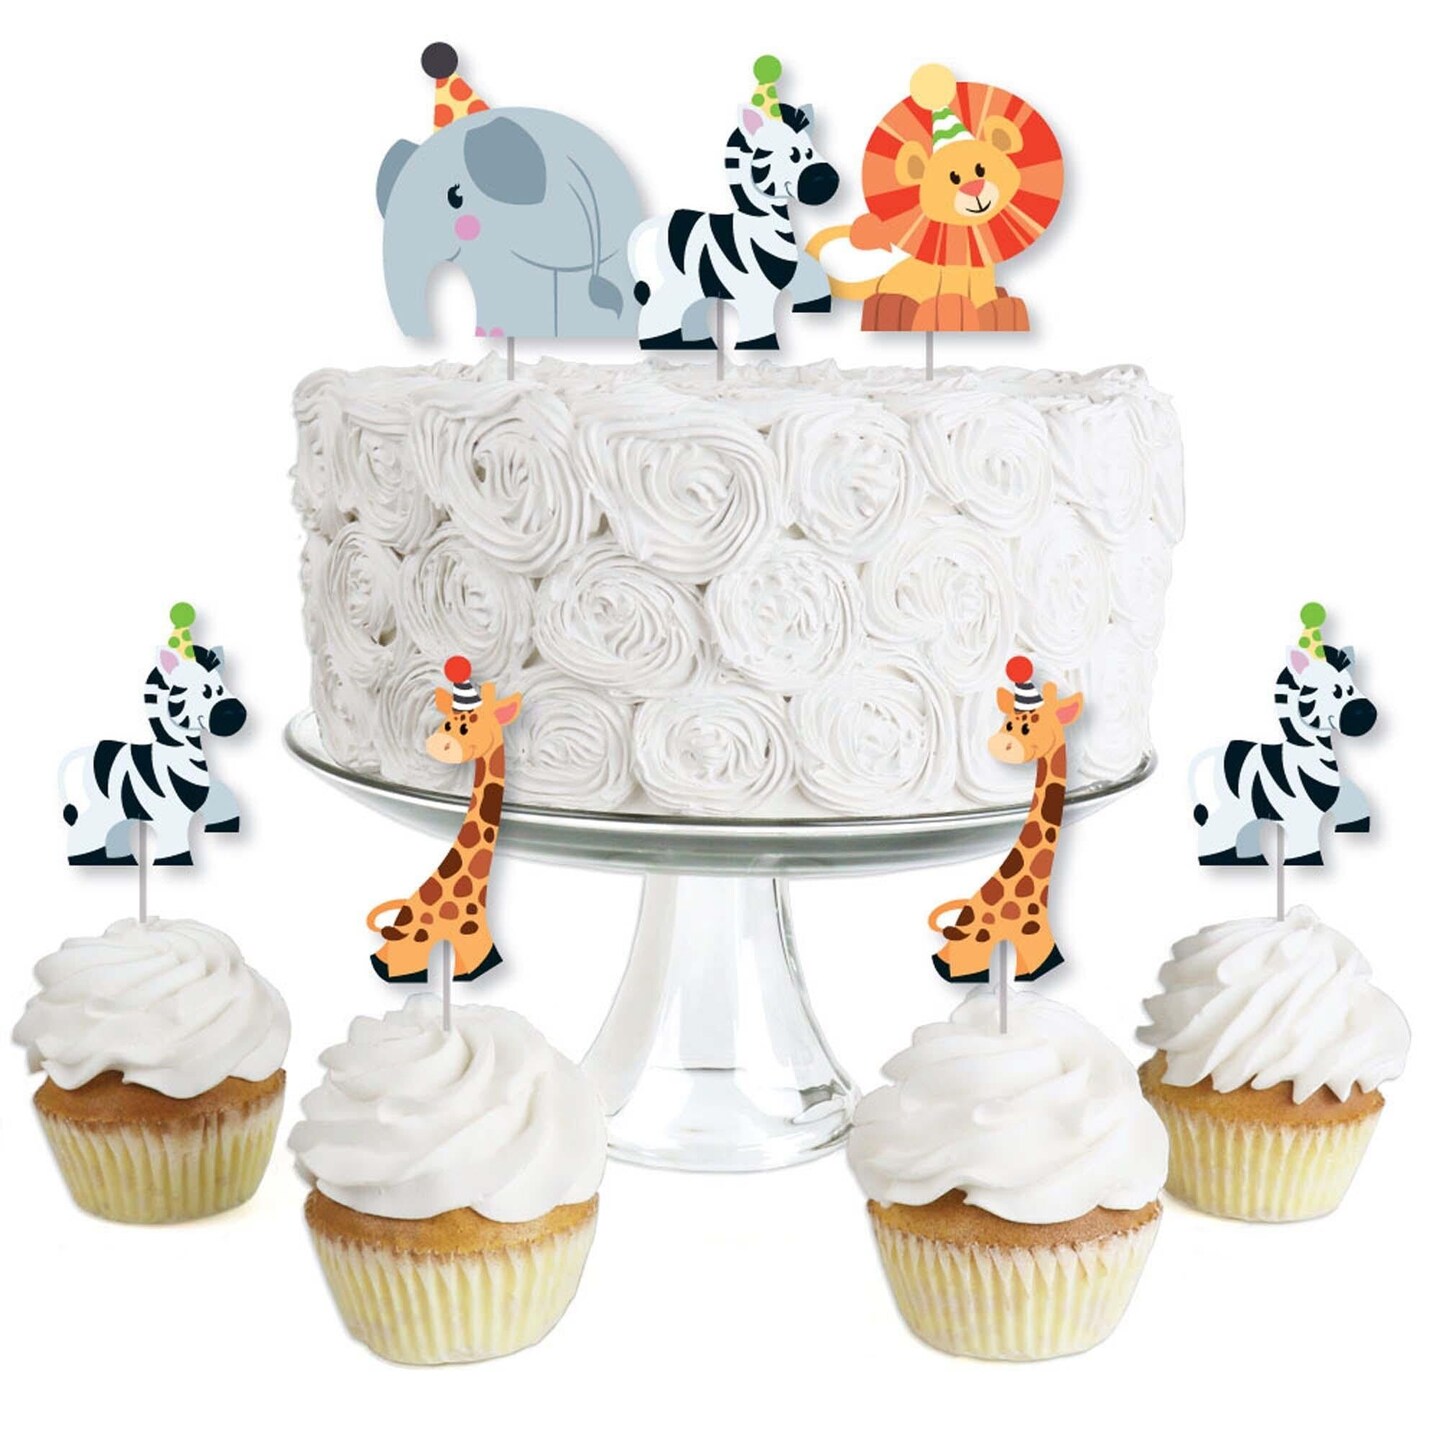 Cake Toppers Cute Jungle Safari Theme Animals Birthday Cake Decoration Cupcake  Topper Decor Ornaments For Children Baby Shower Birthday Party, 7 Pcs |  Fruugo NO